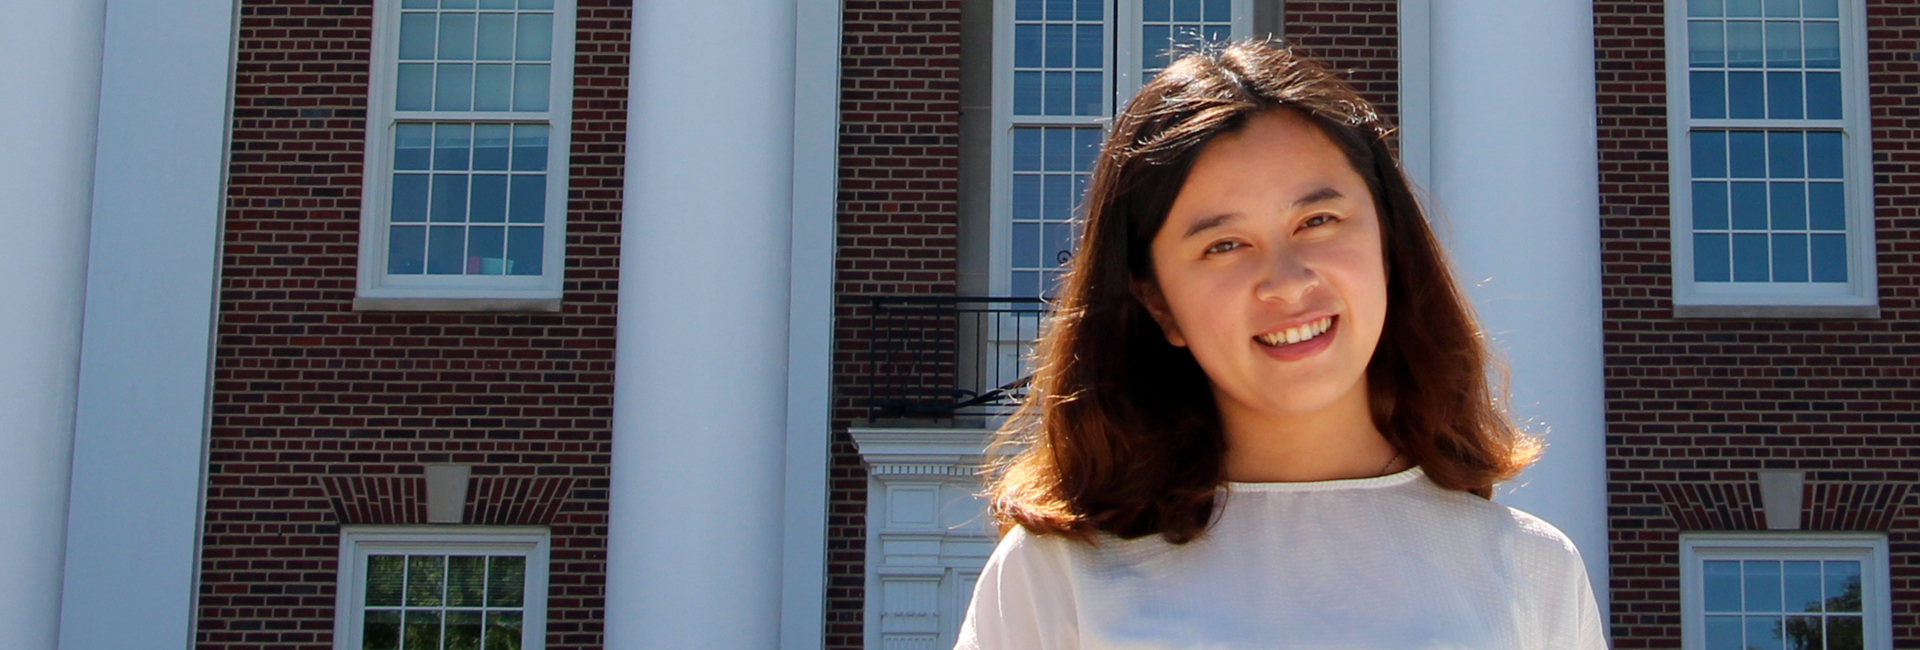 Hui Zhu is studying at UNO thanks to a Foreign Language Teaching Assistant (FLTA) Program grant